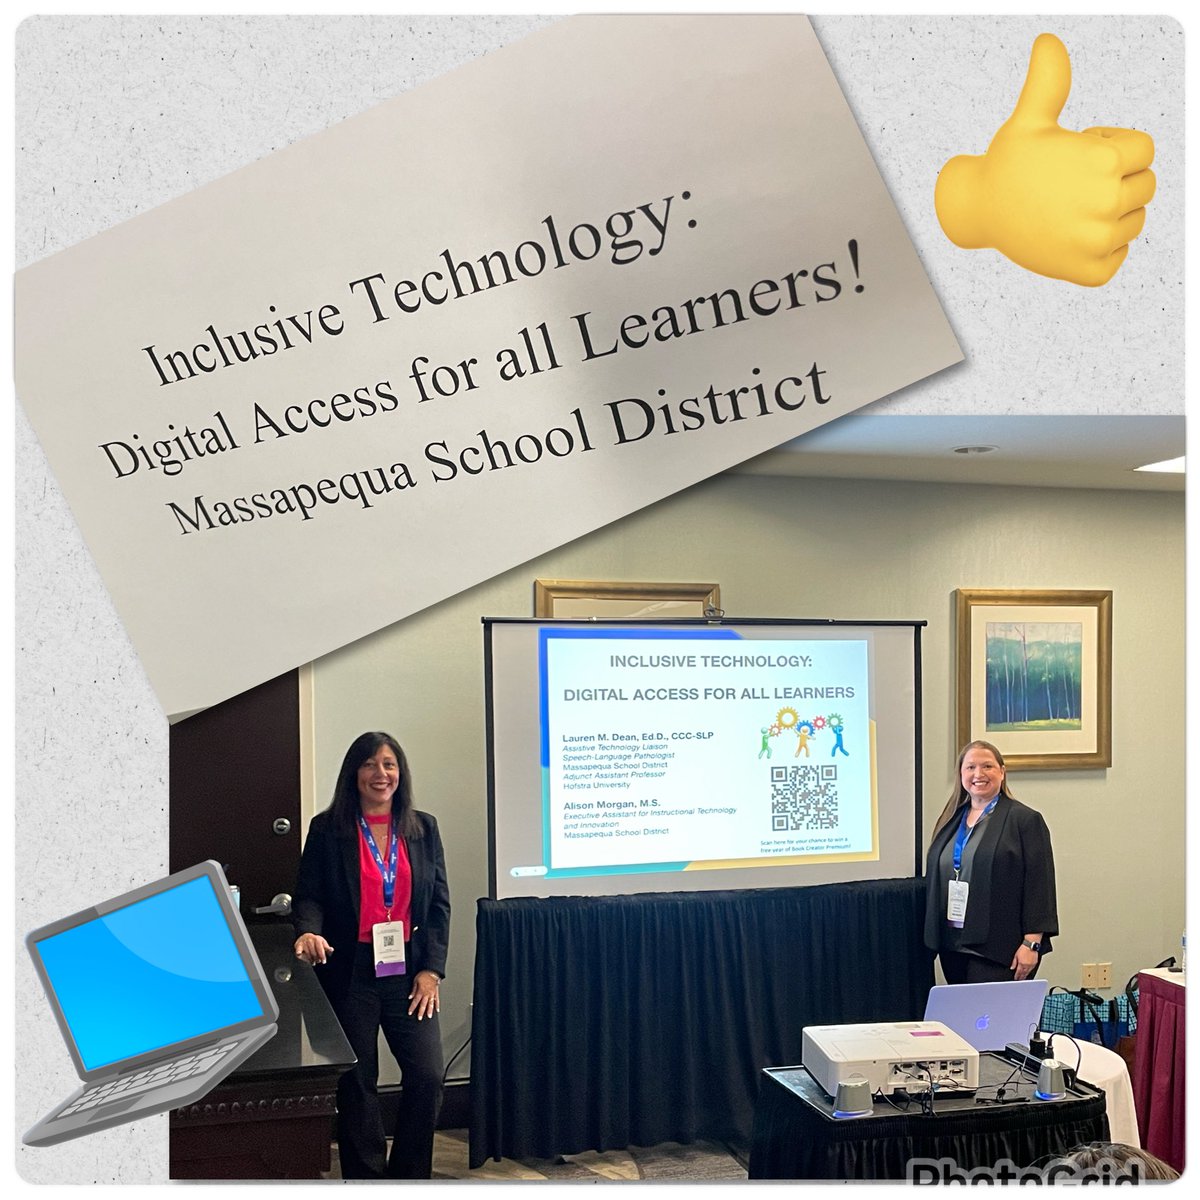 Amazing presentation by @mrsmorgan39 and @DrLaurenDean @assetny conference 2023!